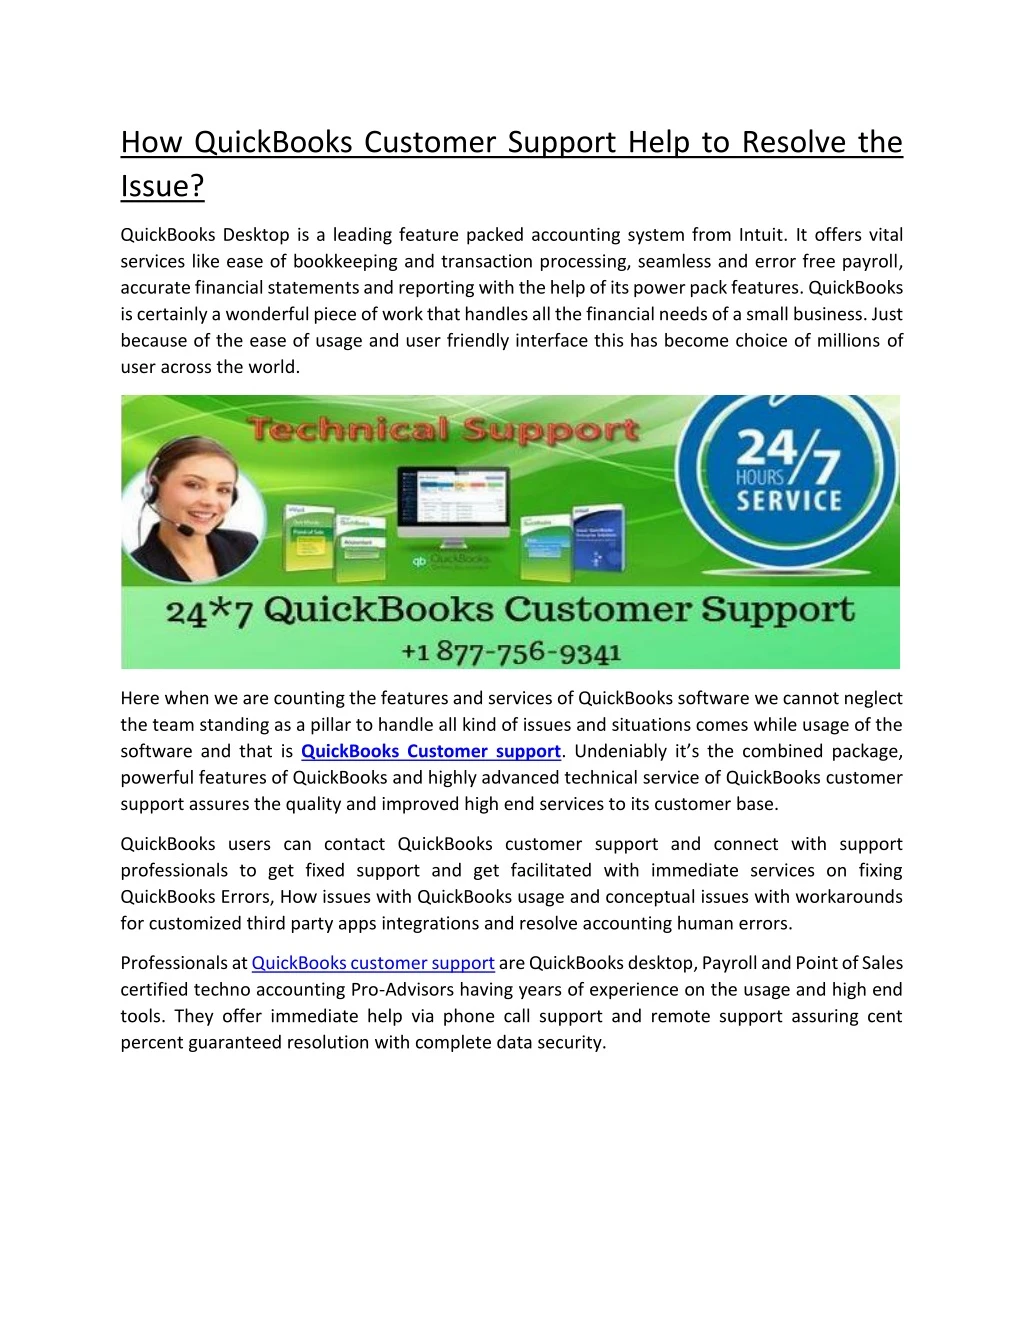 how quickbooks customer support help to resolve